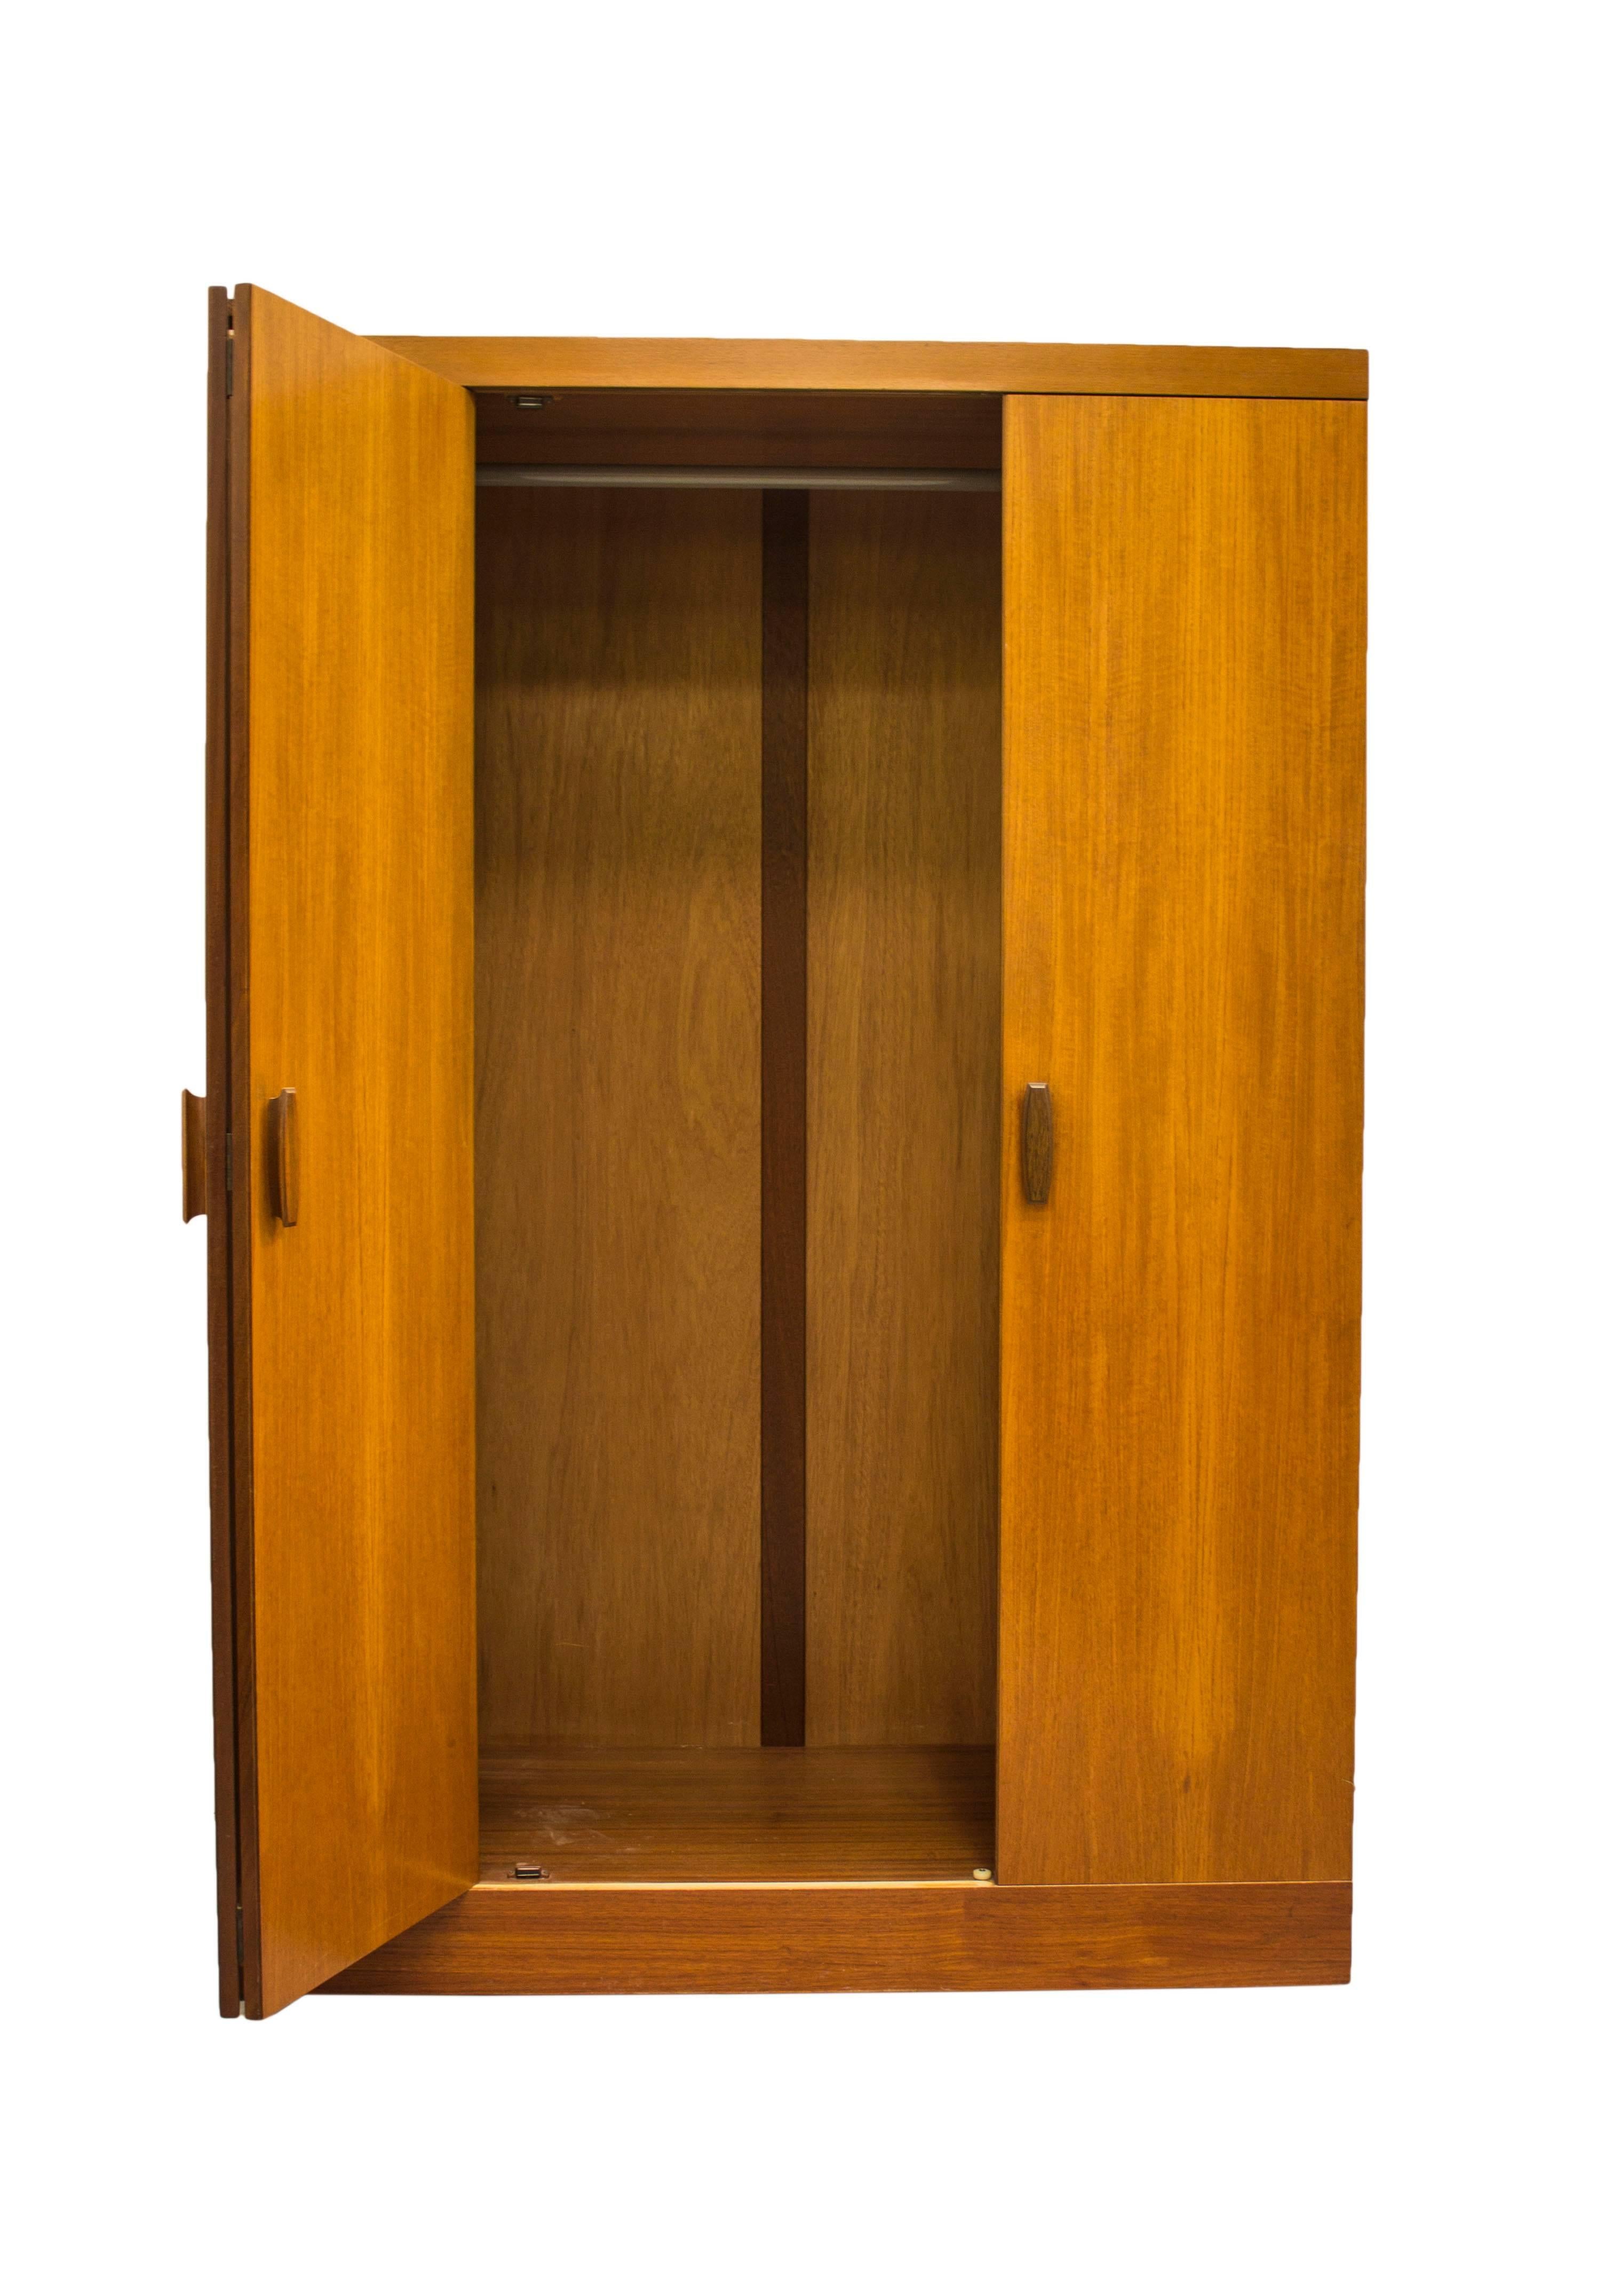 1965 could be argued as one of the best years for G Plan design with R Bennett creating the stunning Quadrille range of furniture in luxurious Teak with beautiful Rosewood handles.

This extremely spacious and highly practical wardrobe is a great